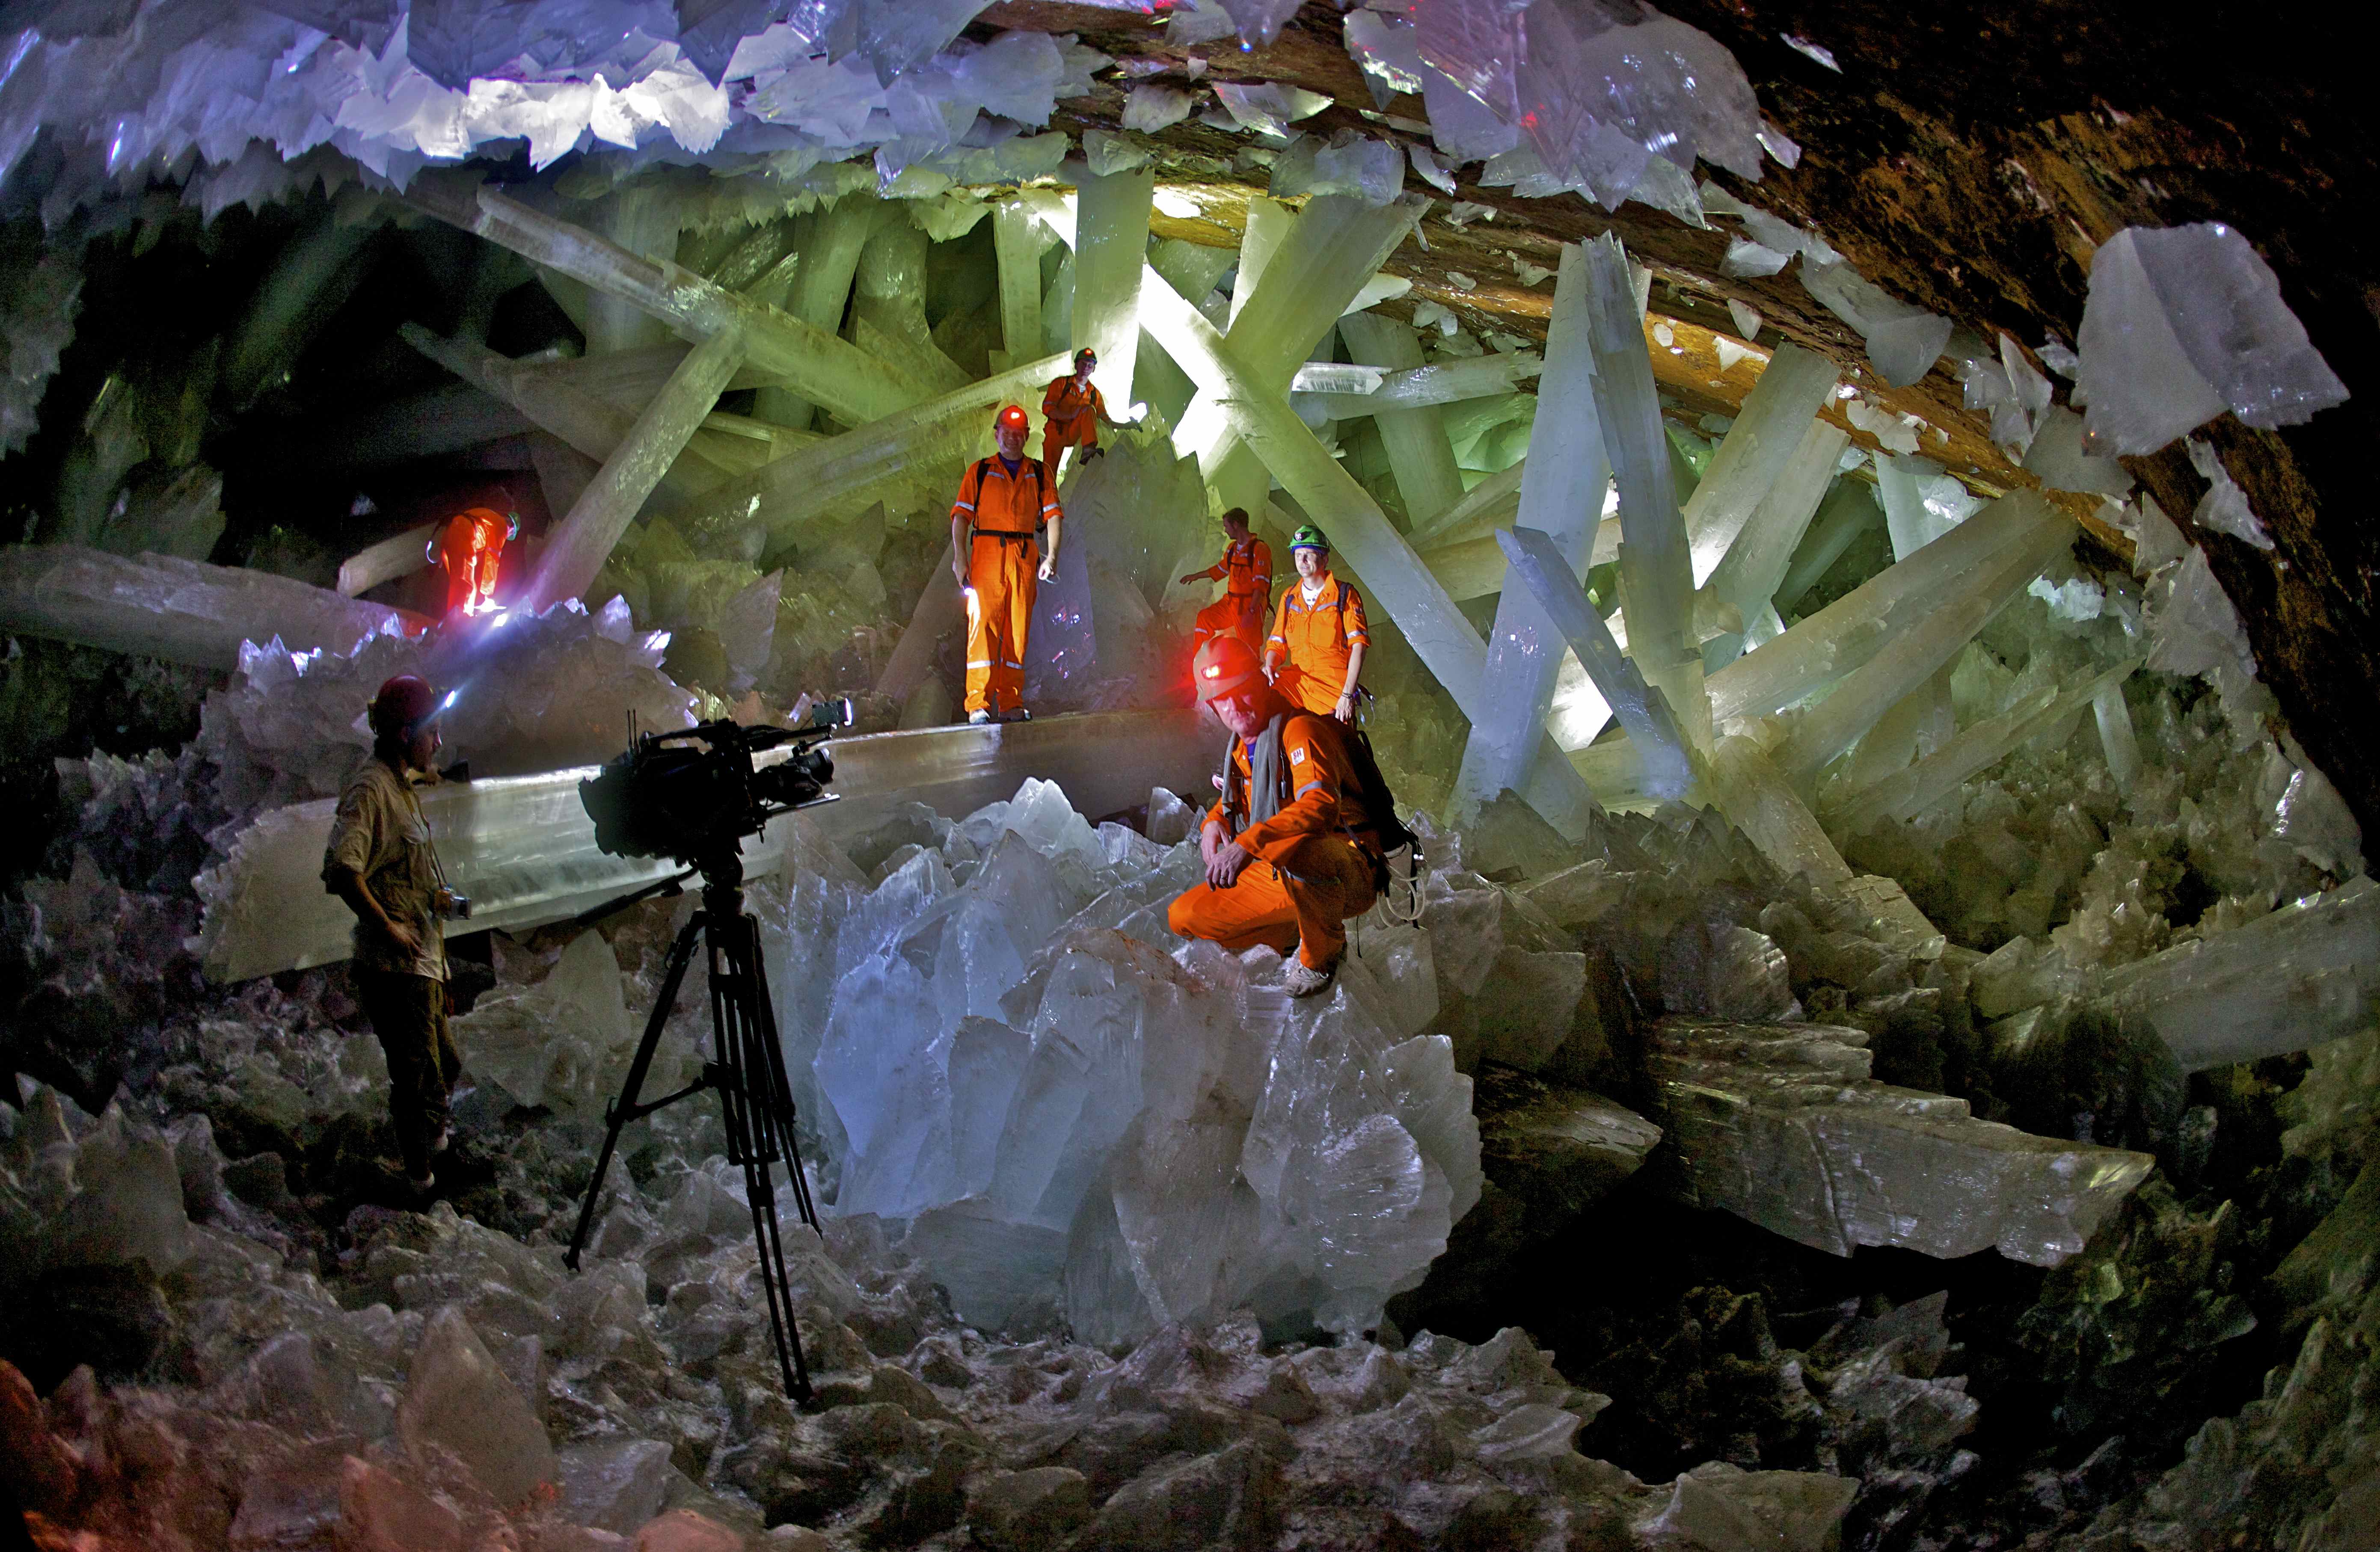 Cave of the Crystals - Naica Mexico - Giant Crystals Film Crew